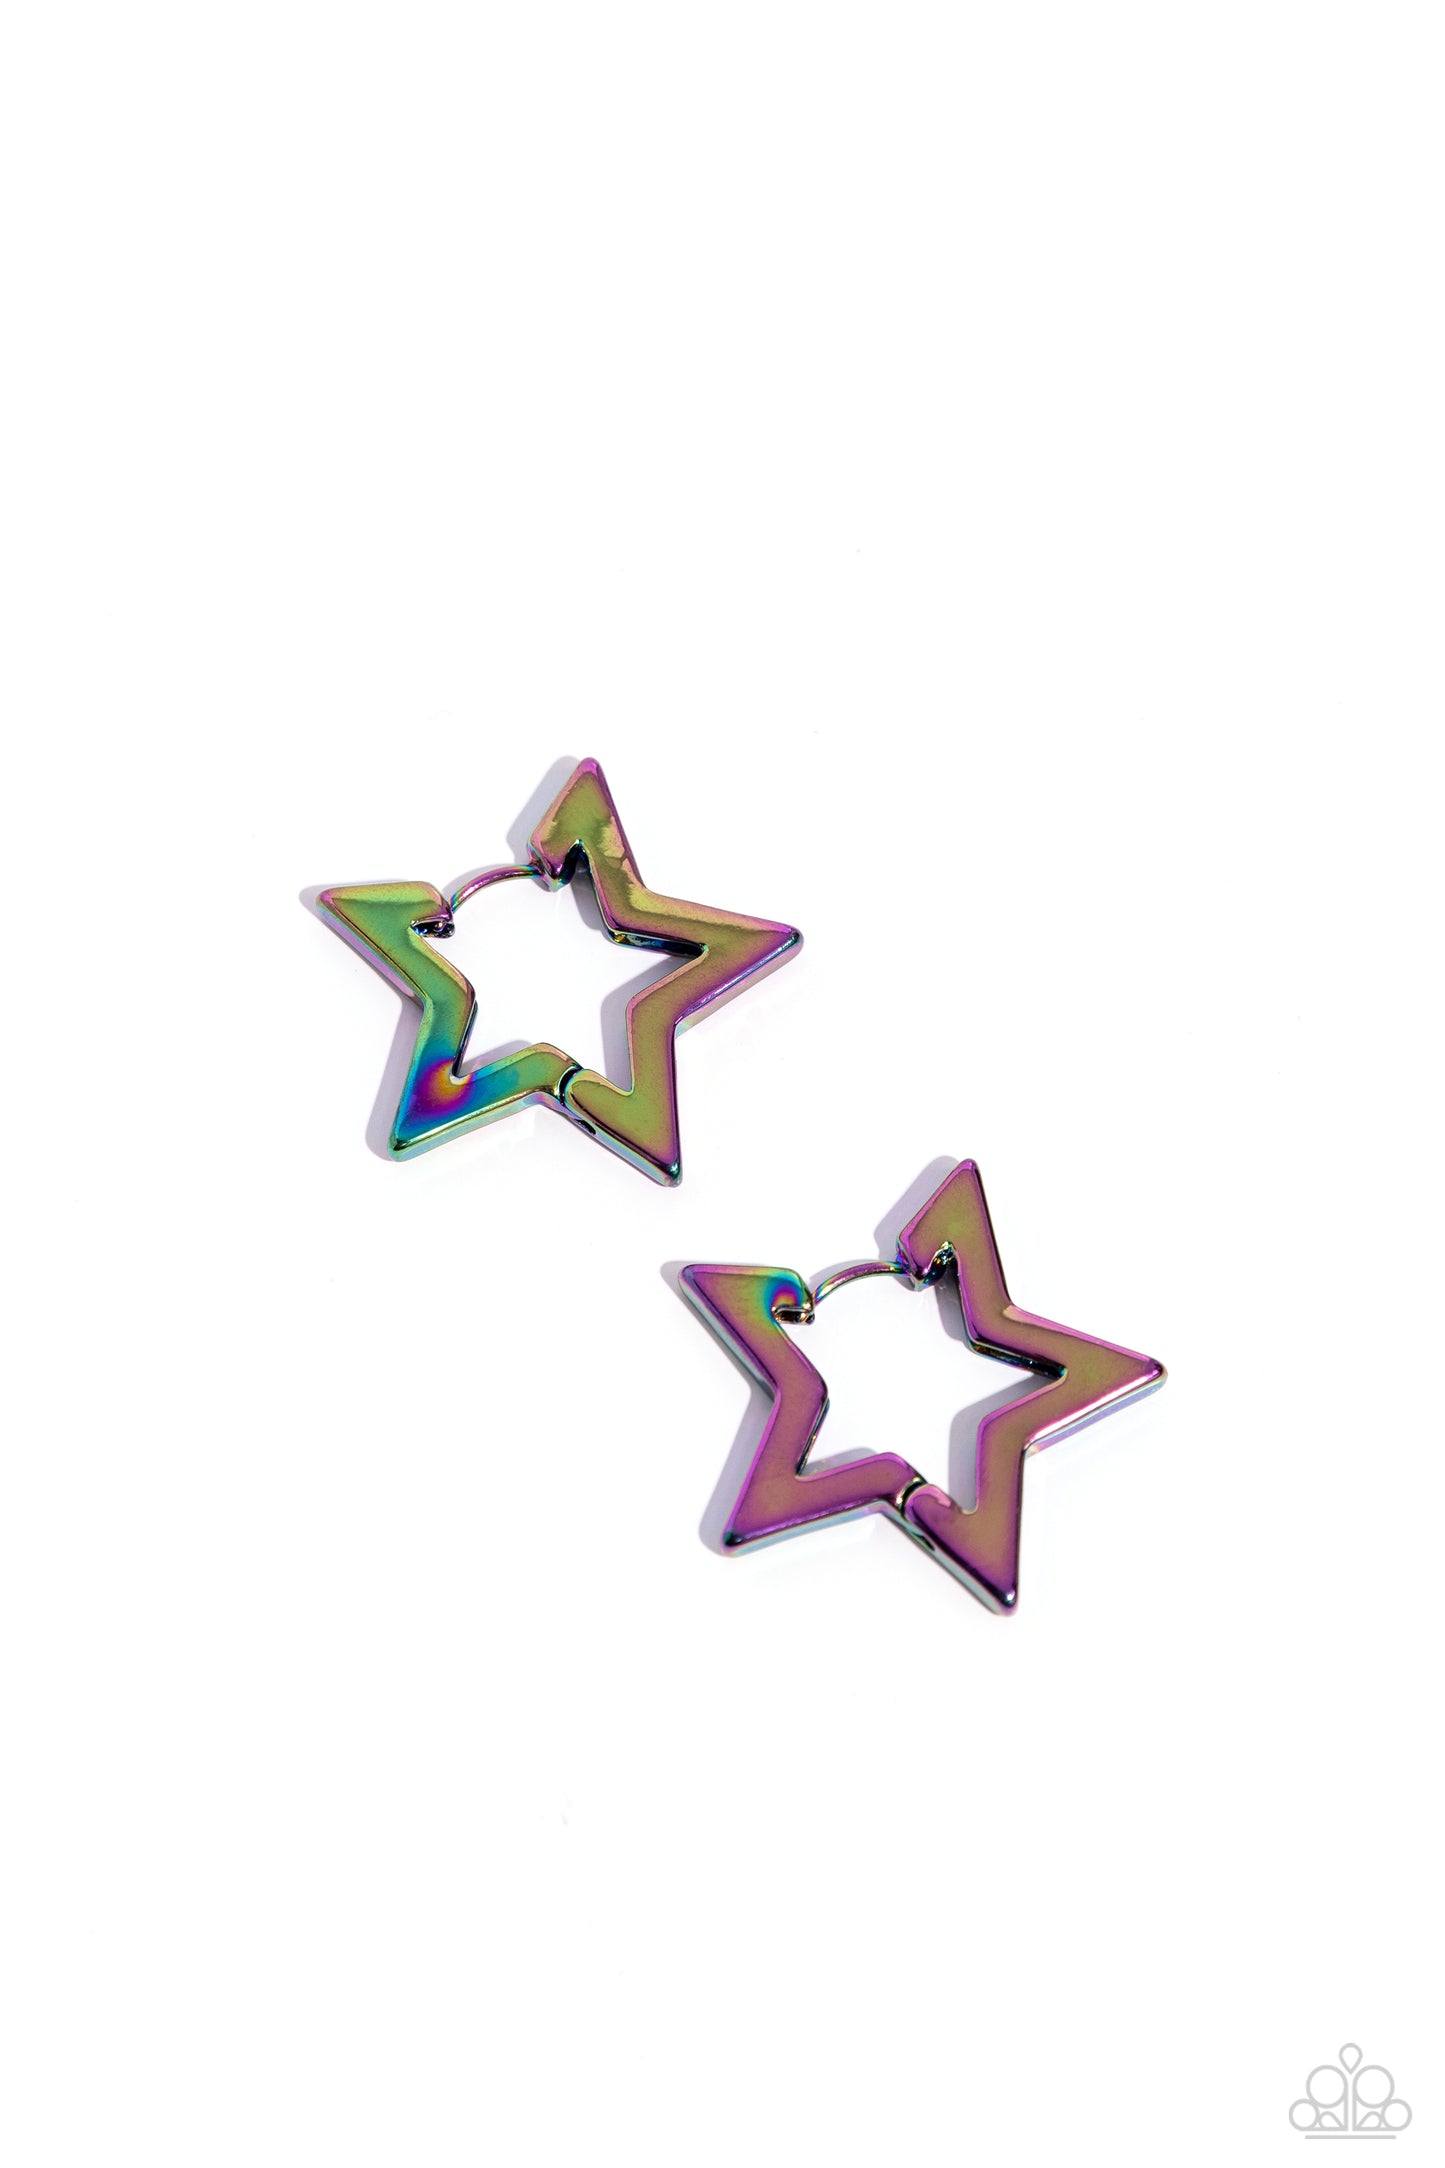 <p>Paparazzi Accessories - In a Galaxy STAR, STAR Away - Multi Hoop Earrings dipped in an oil spill shade, a three-dimensional star-shaped hoop hinges around the ear resulting in a stellar statement. Earring attaches to a standard hinge closure fitting. Hoop measures approximately 1 1/4" in diameter.</p> <p><i>Sold as one pair of hinge hoop earrings.</i></p>